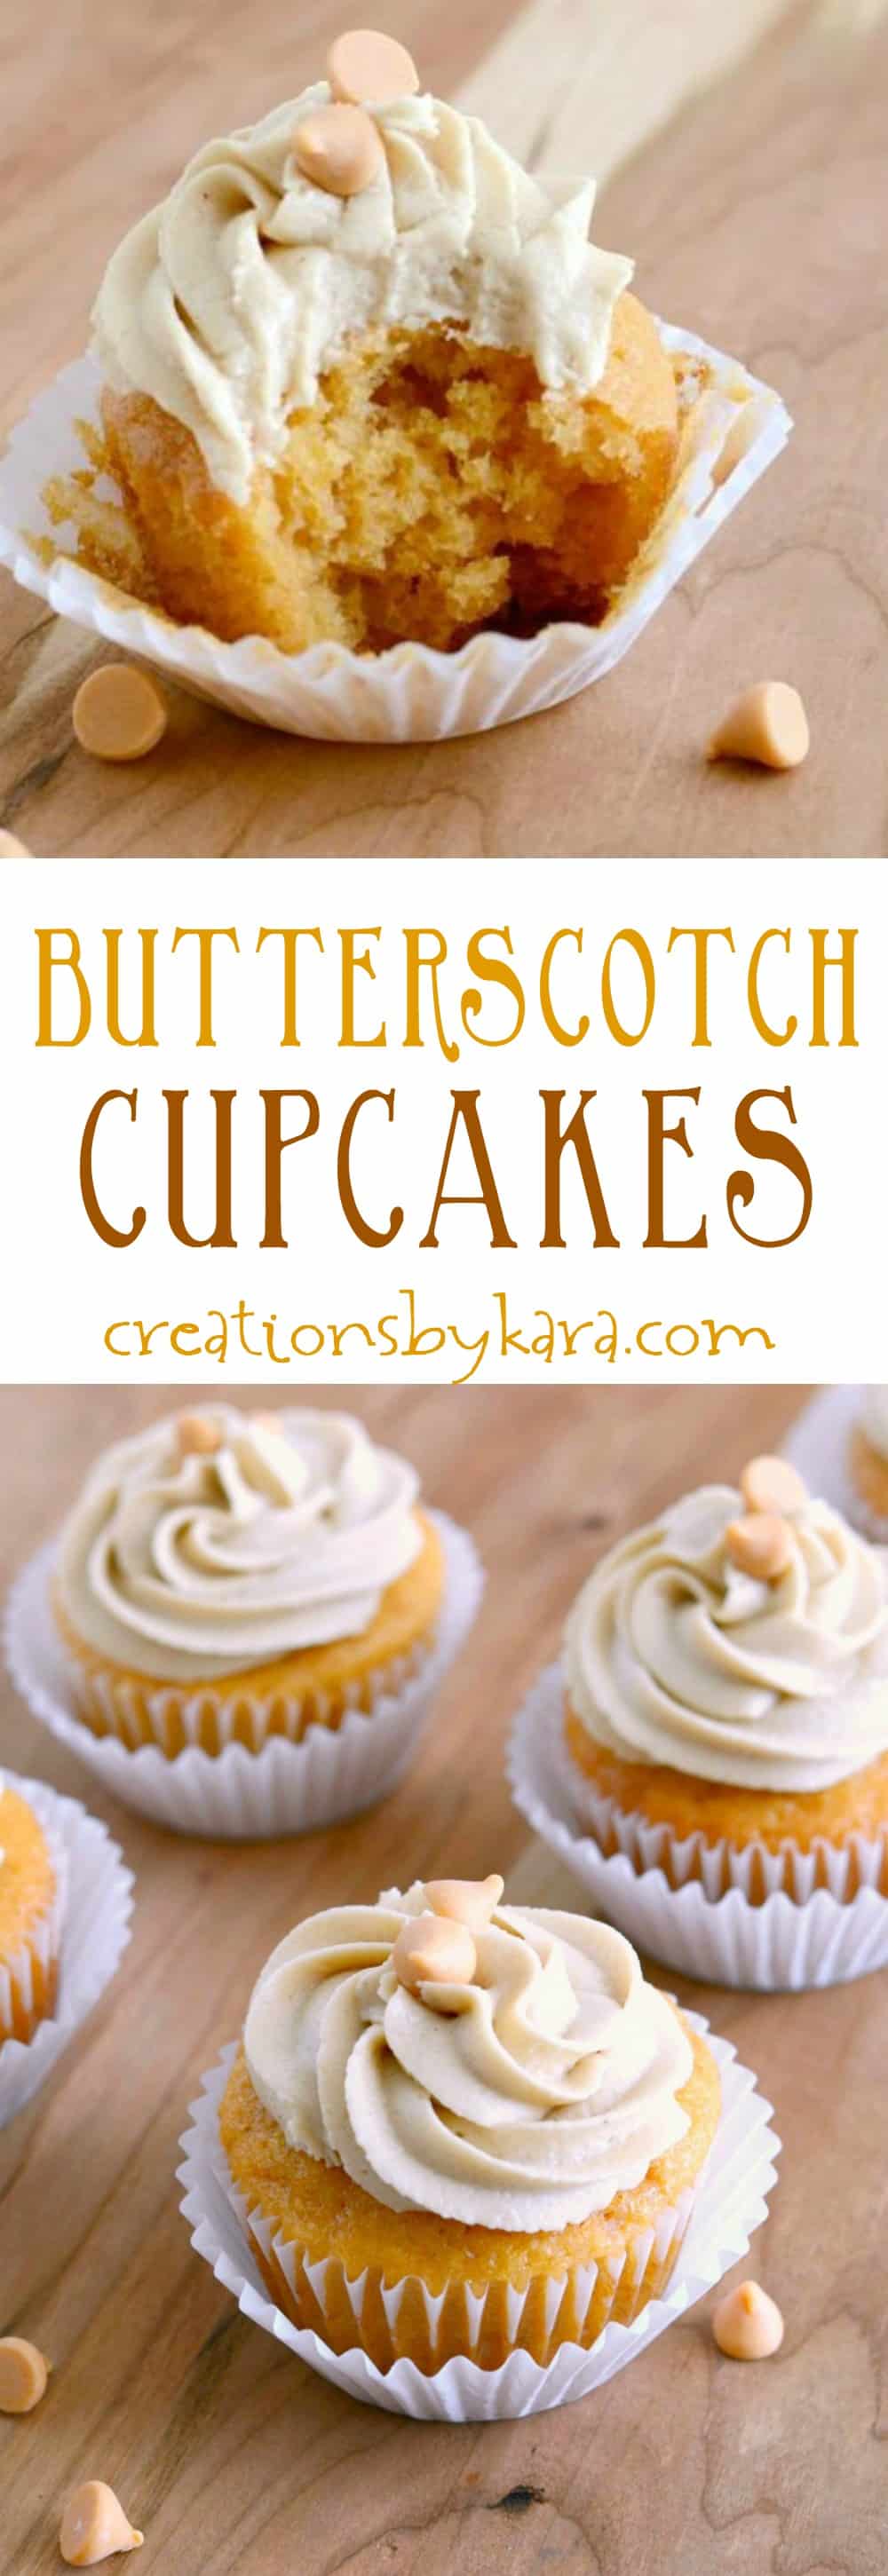 Butterscotch Cupcakes with Butterscotch Frosting - Creations by Kara